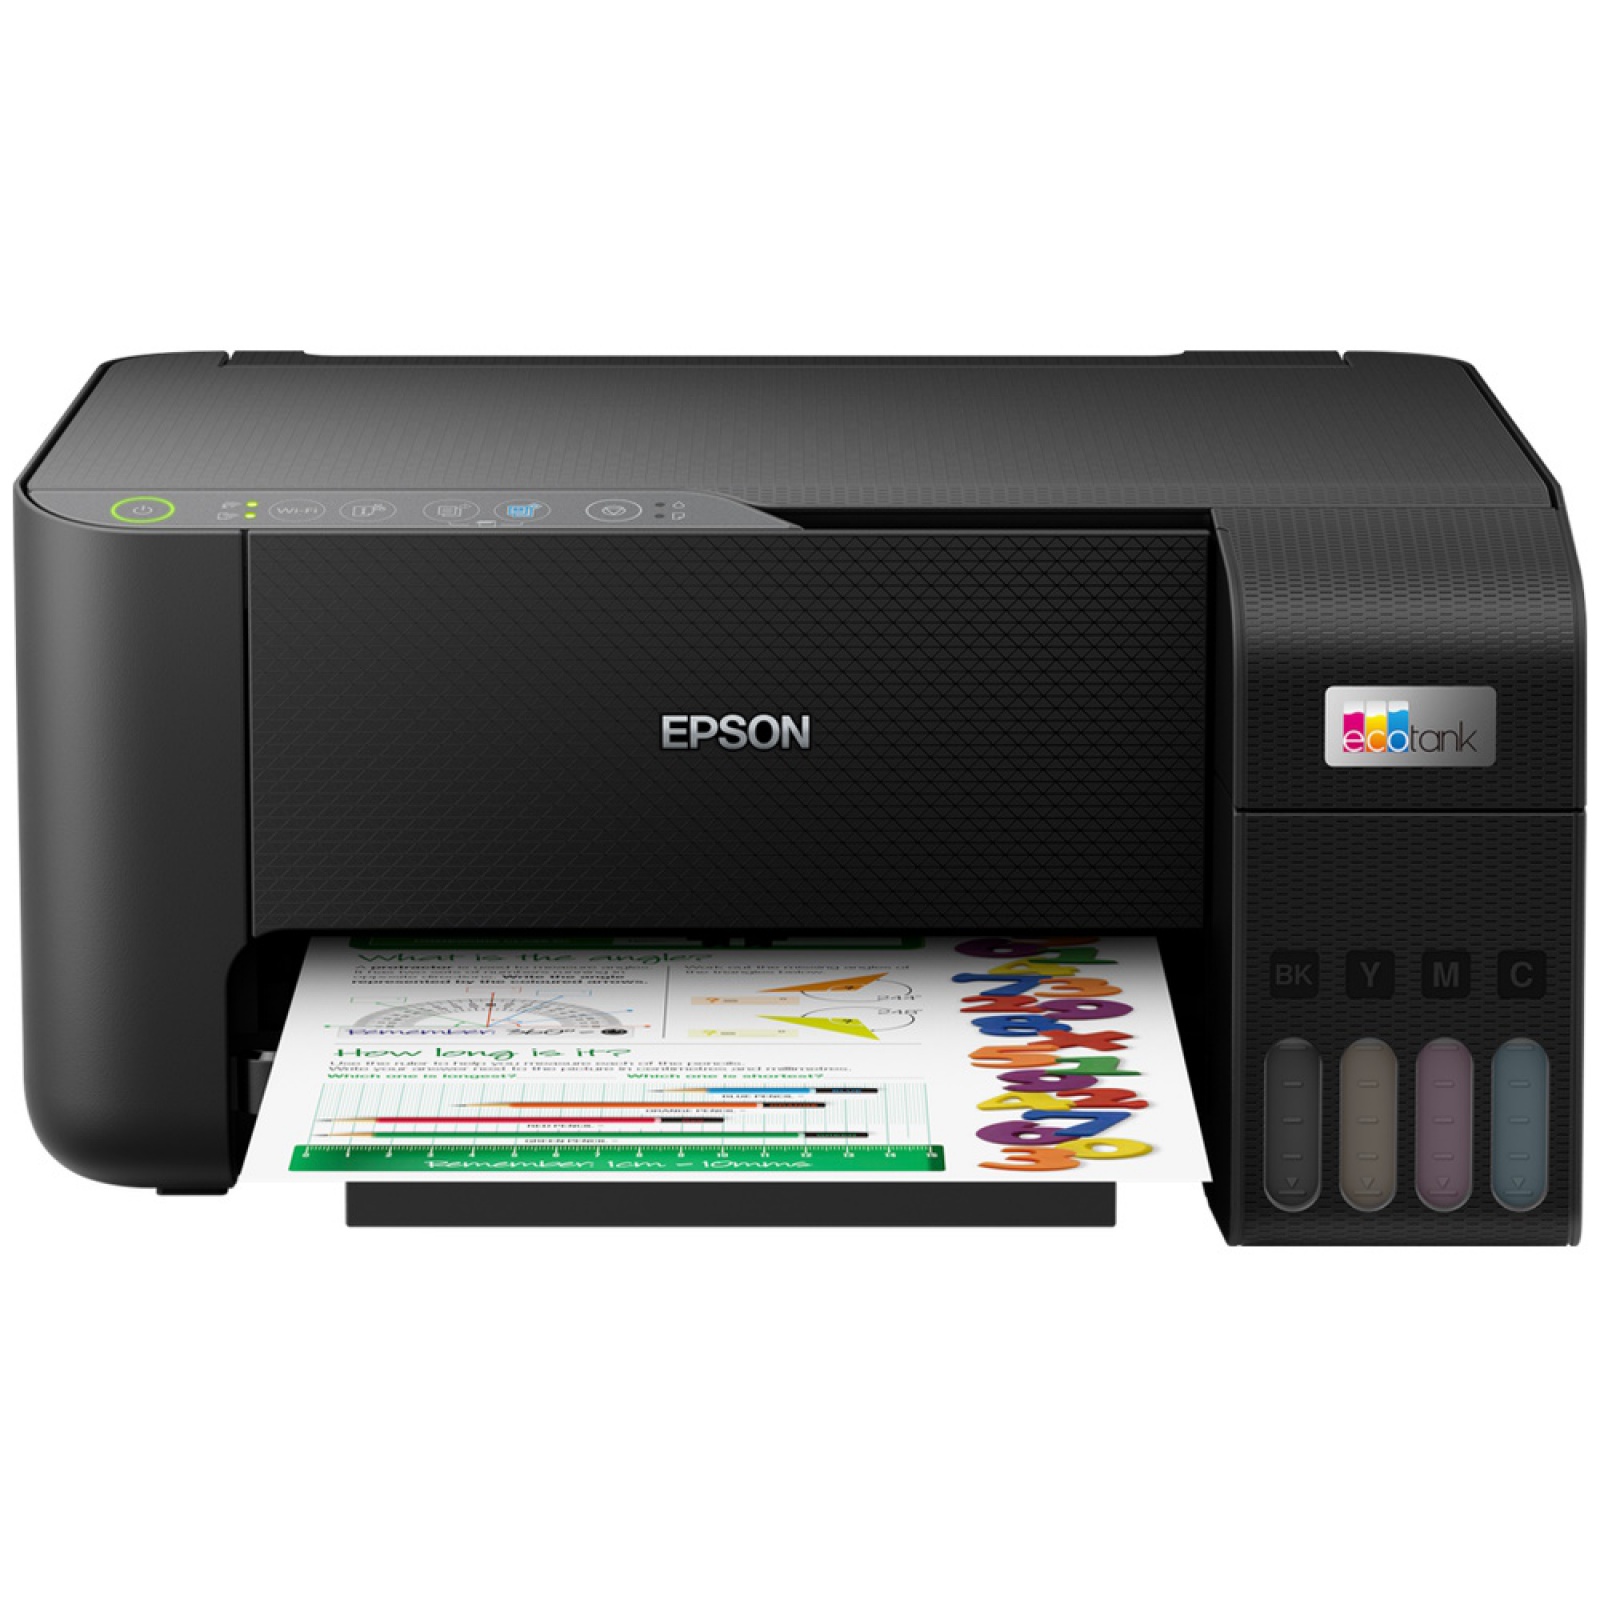 Print thick paper and envelop in Epson printer 